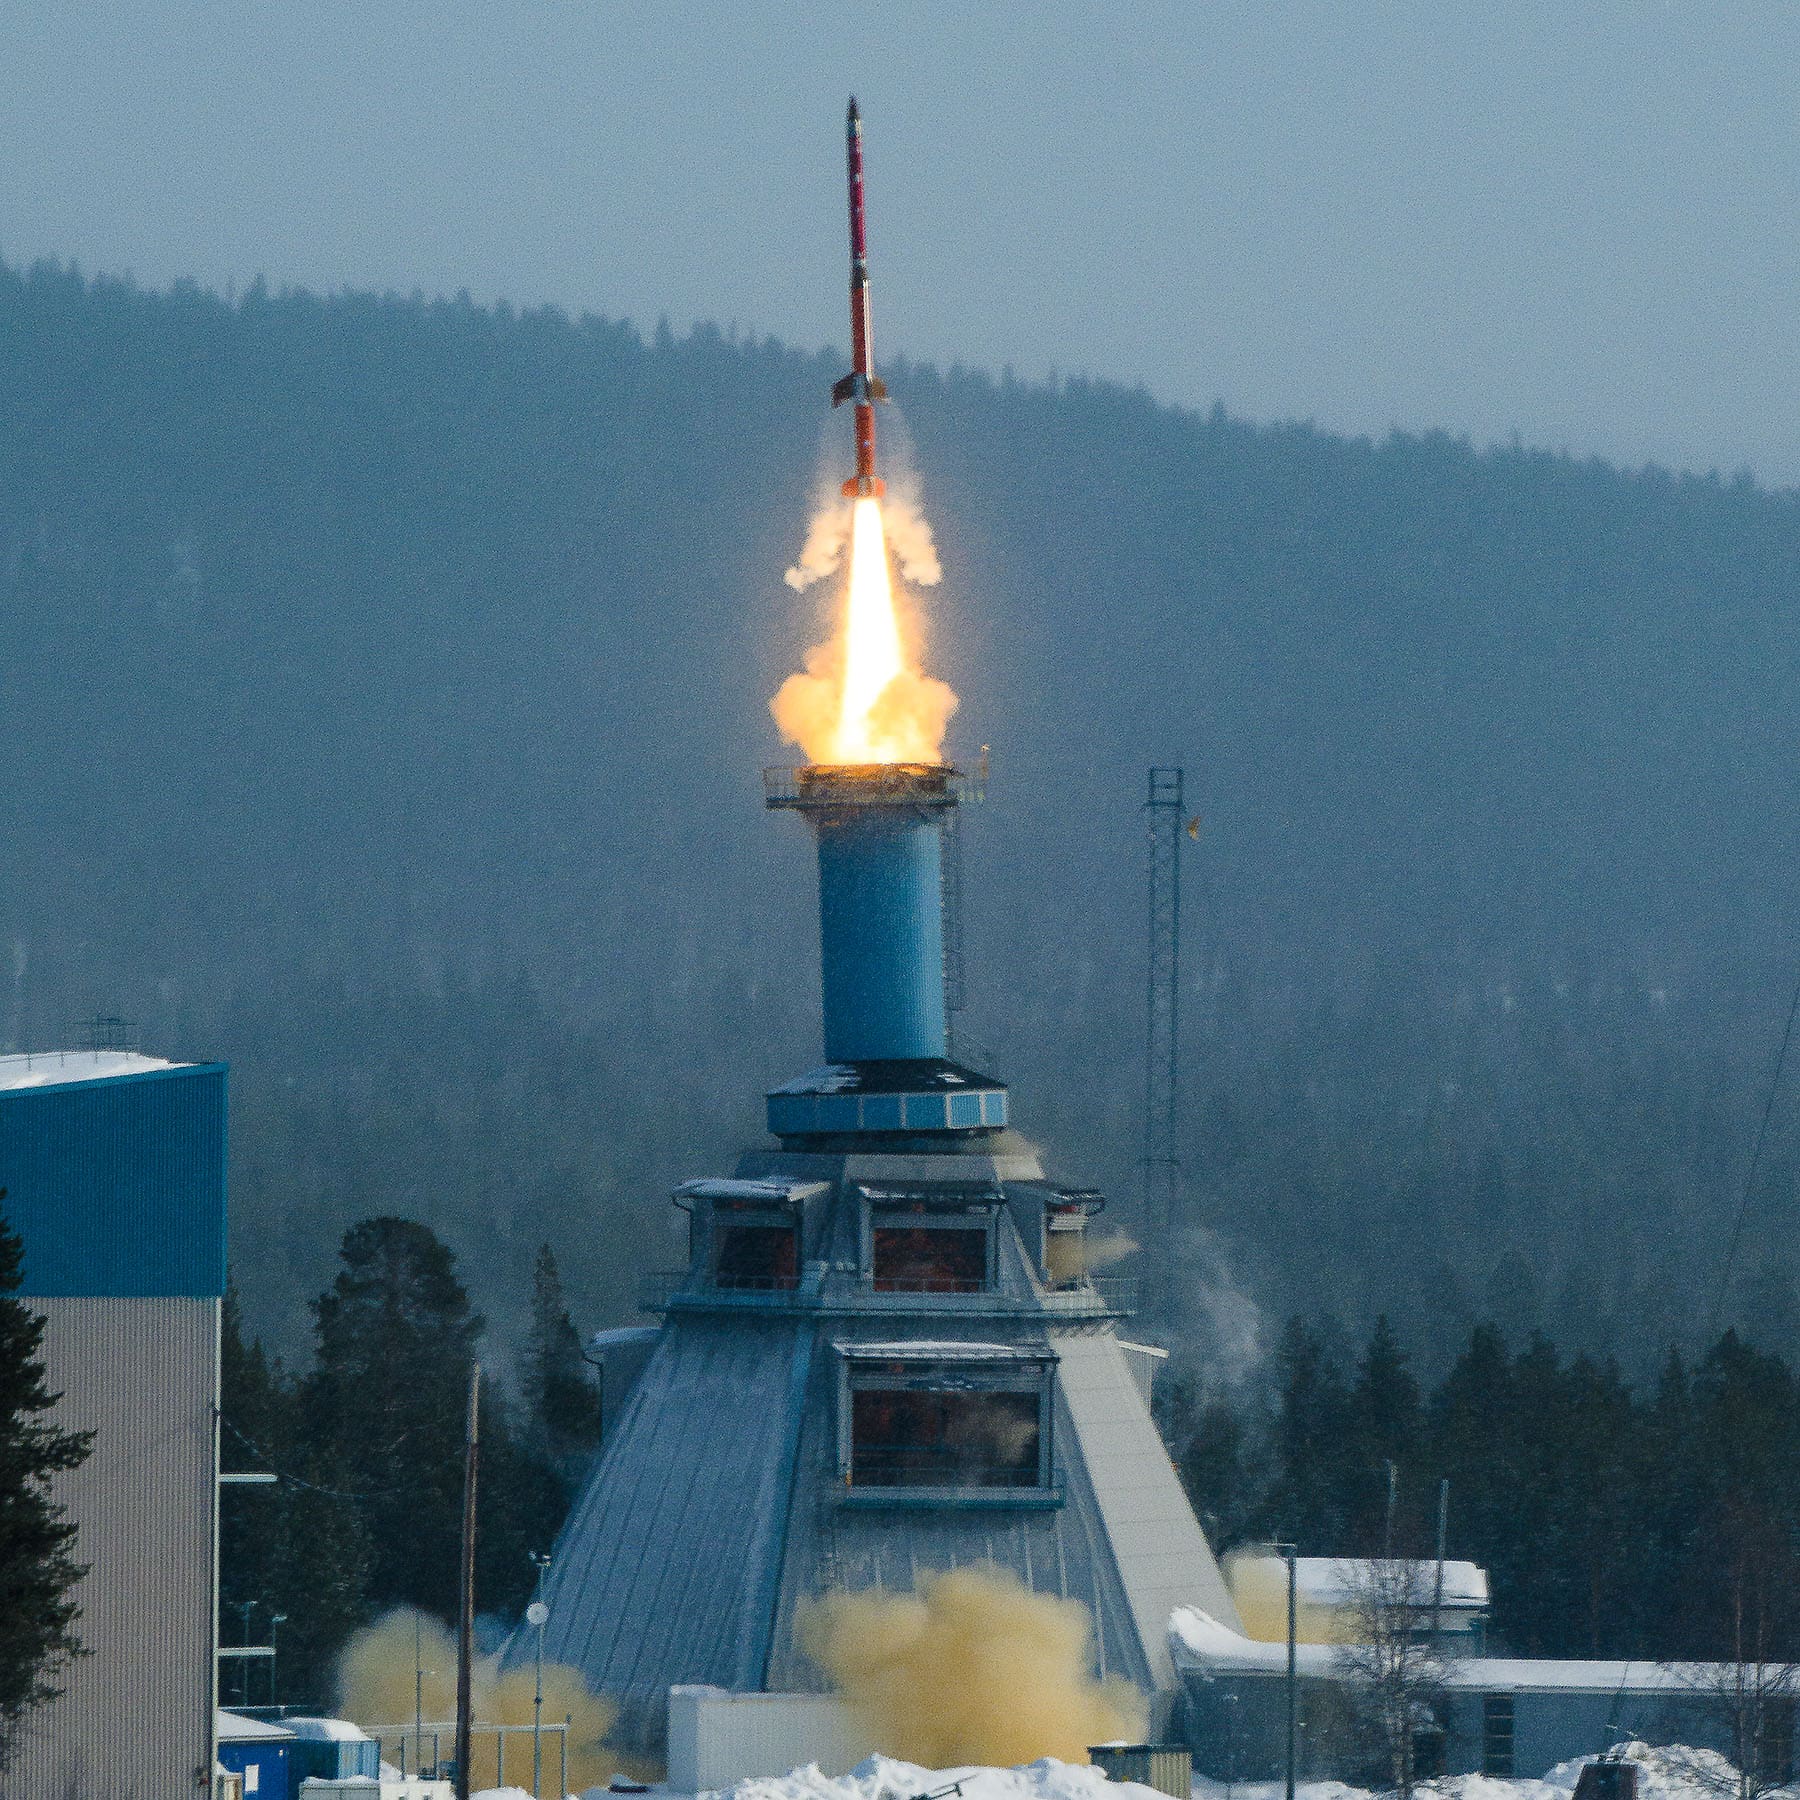 TEXUS 60 successfully launched